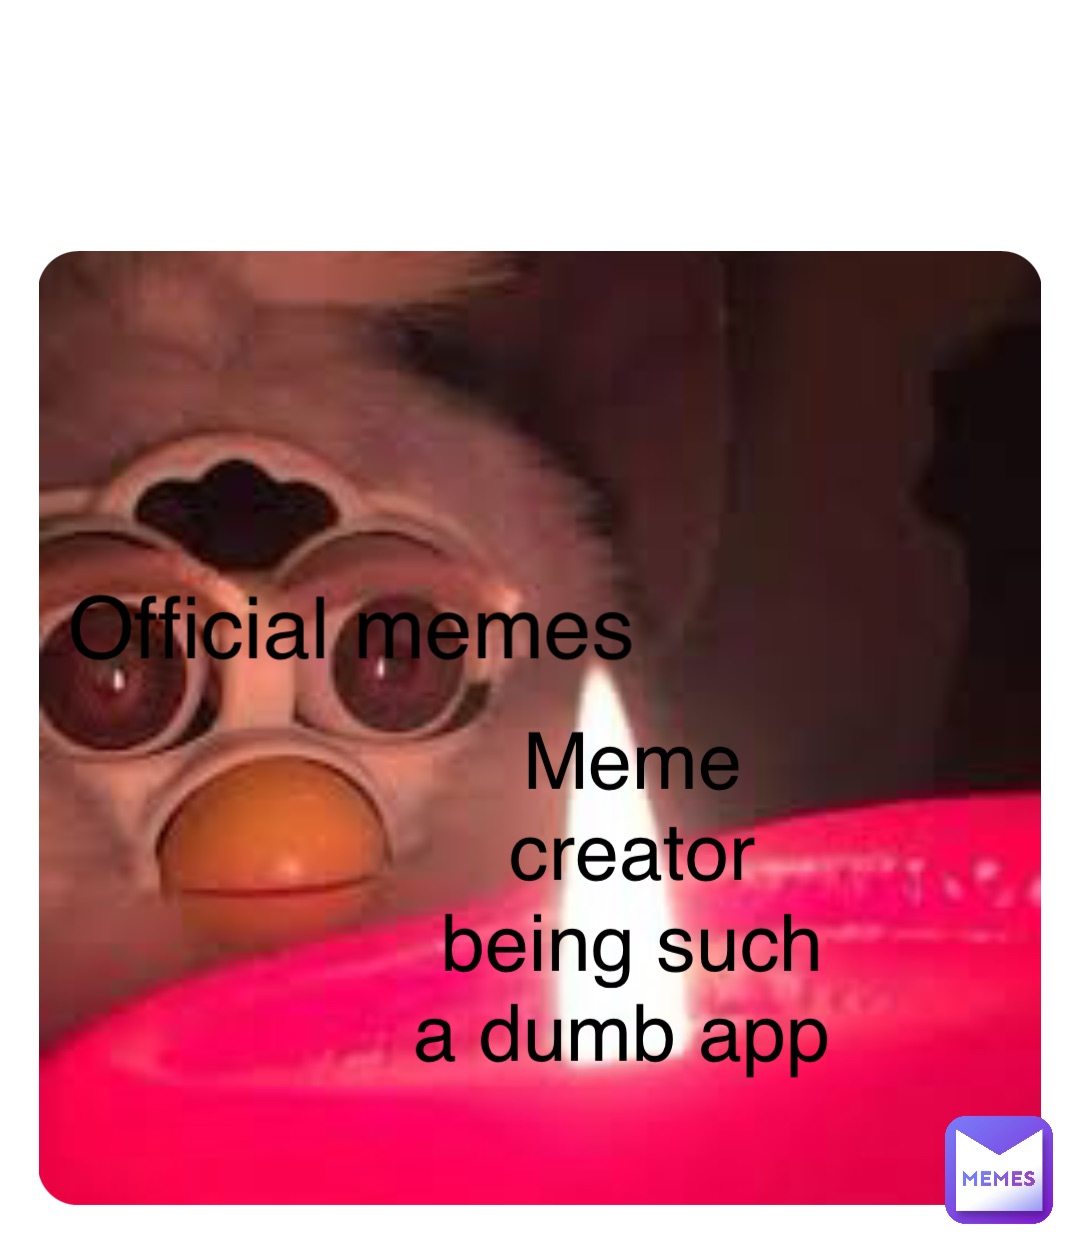 Double tap to edit Meme creator being such a dumb app Official memes